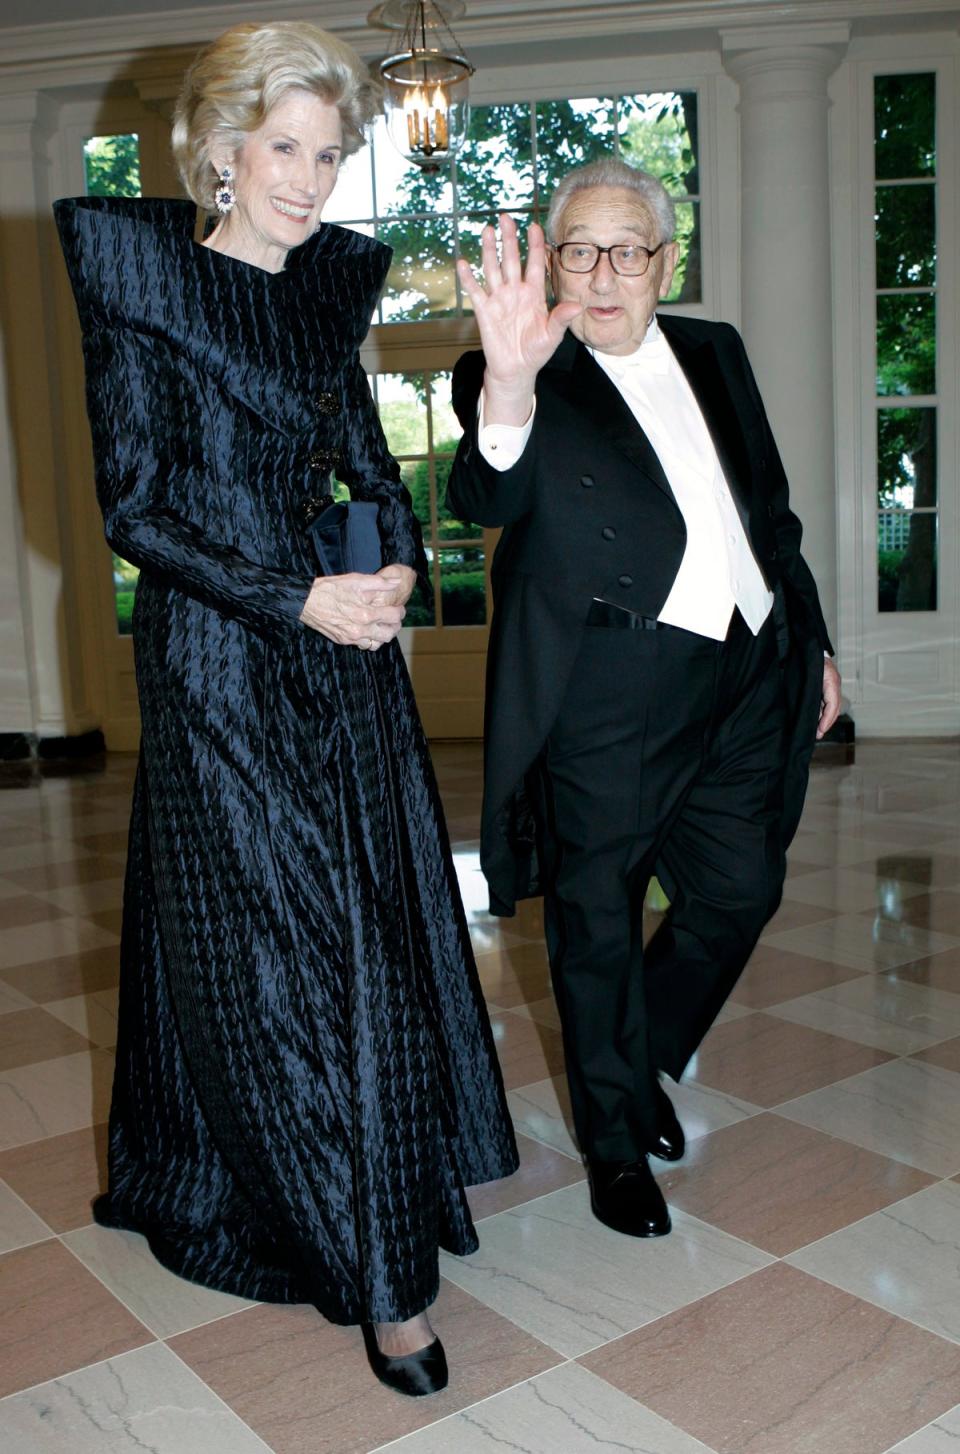 Henry Kissinger, right, and his wife Nancy walk through the Booksellers Area as they arrive for the State Dinner in honor of Queen Elizabeth II and her husband Prince Philip, May 7, 2007, at the White House in Washington. (AP)